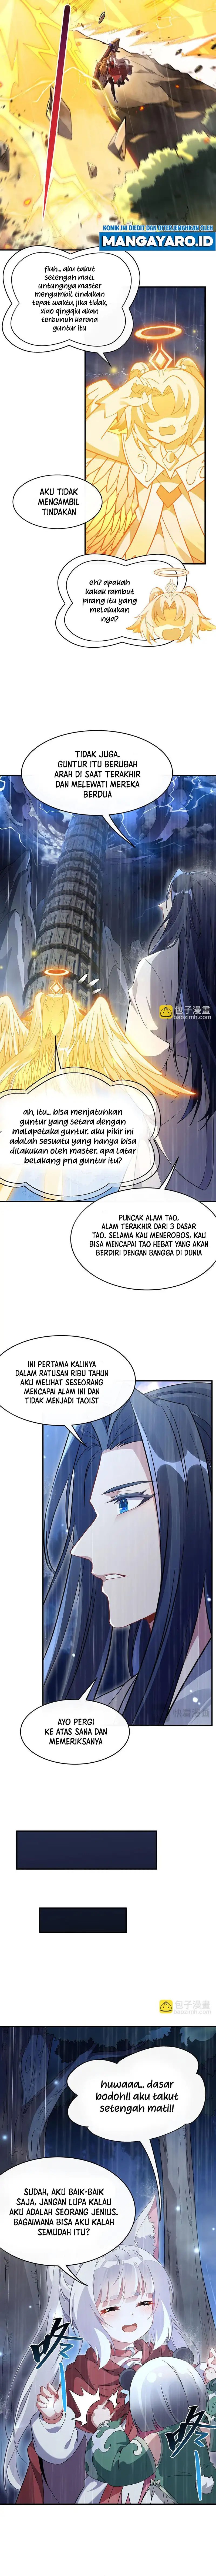 Dilarang COPAS - situs resmi www.mangacanblog.com - Komik my female apprentices are all big shots from the future 228 - chapter 228 229 Indonesia my female apprentices are all big shots from the future 228 - chapter 228 Terbaru 5|Baca Manga Komik Indonesia|Mangacan